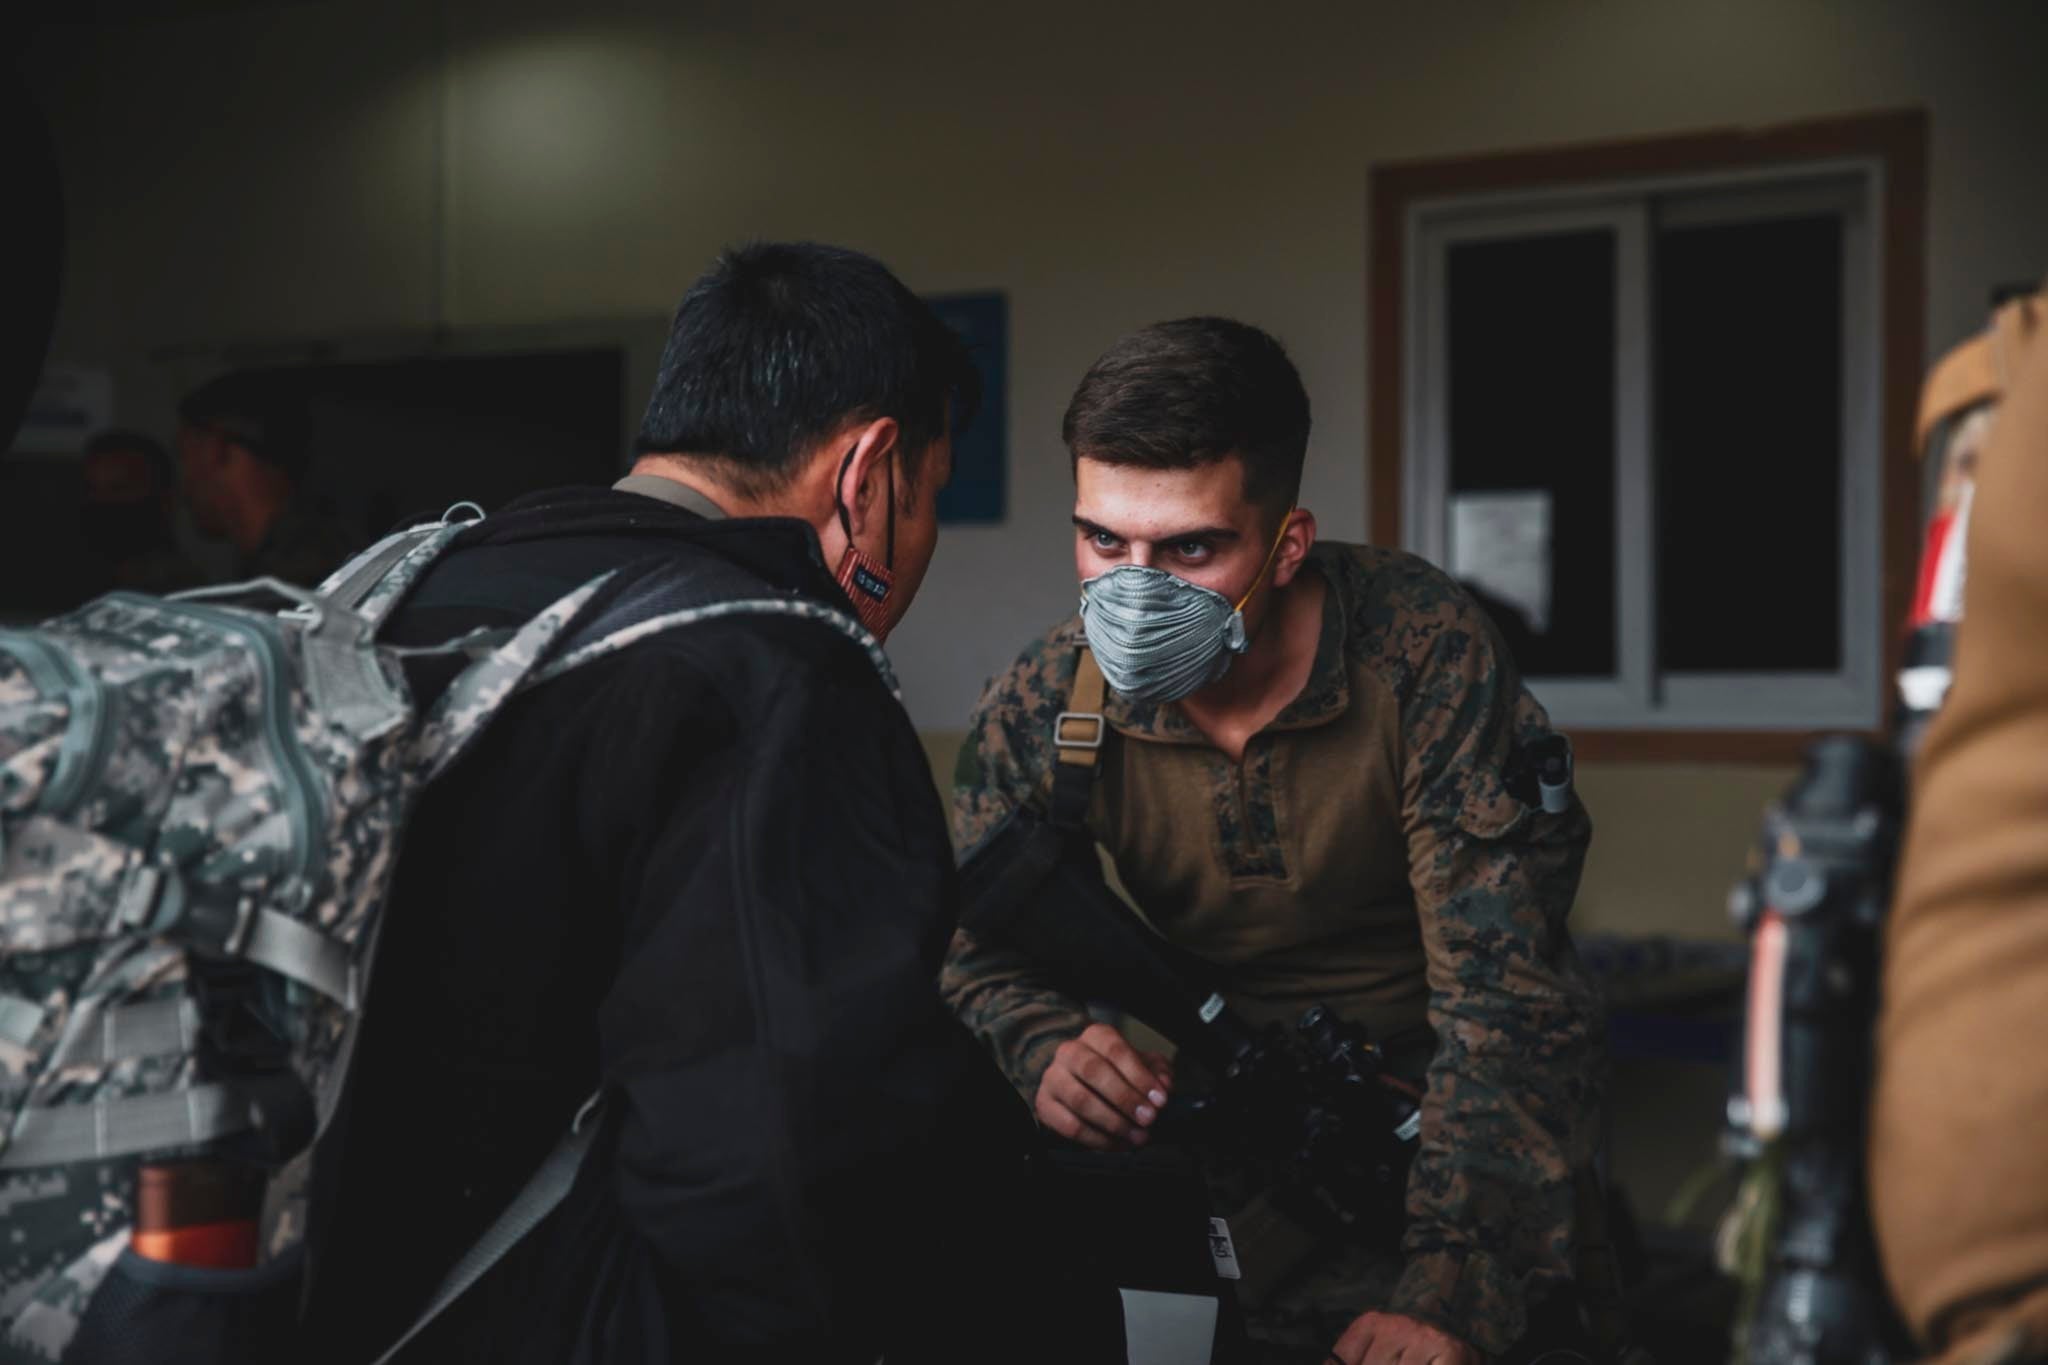 A Marine assigned to the 24th Marine Expeditionary Unit (MEU) processes an evacuee at Hamid Karzai International Airport, Kabul, Afghanistan, August 15. U.S. Soldiers and Marines are assisting the Department of State with an orderly drawdown of designated personnel in Afghanistan. (U.S. Marine Corps photo by Sgt. Isaiah Campbell)